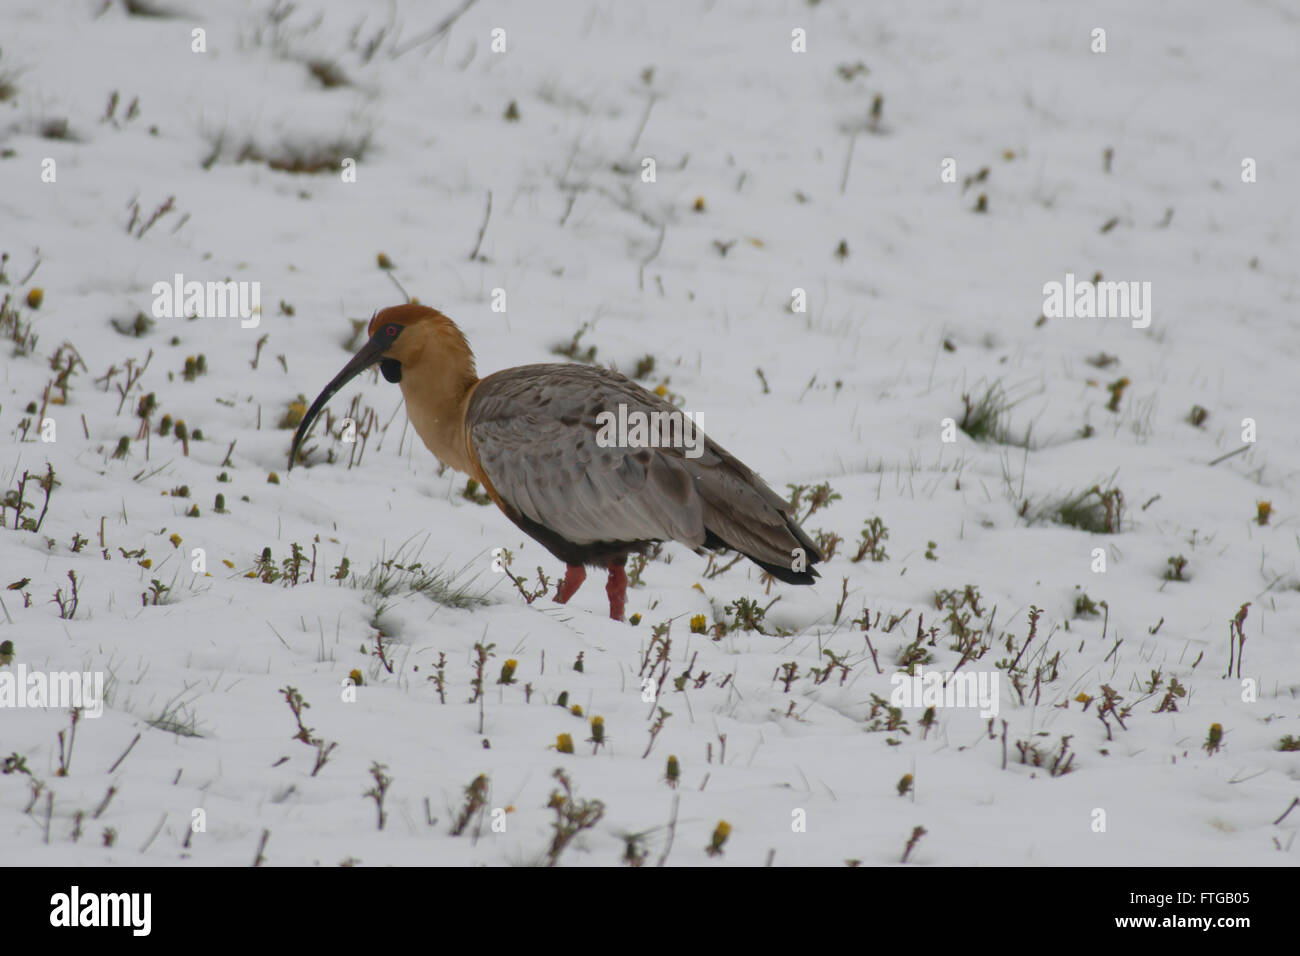 Black-faced ibis staying on the snow in Tierra del Fuego National Park. Typical argentinian bird called Bandurria Austral Stock Photo